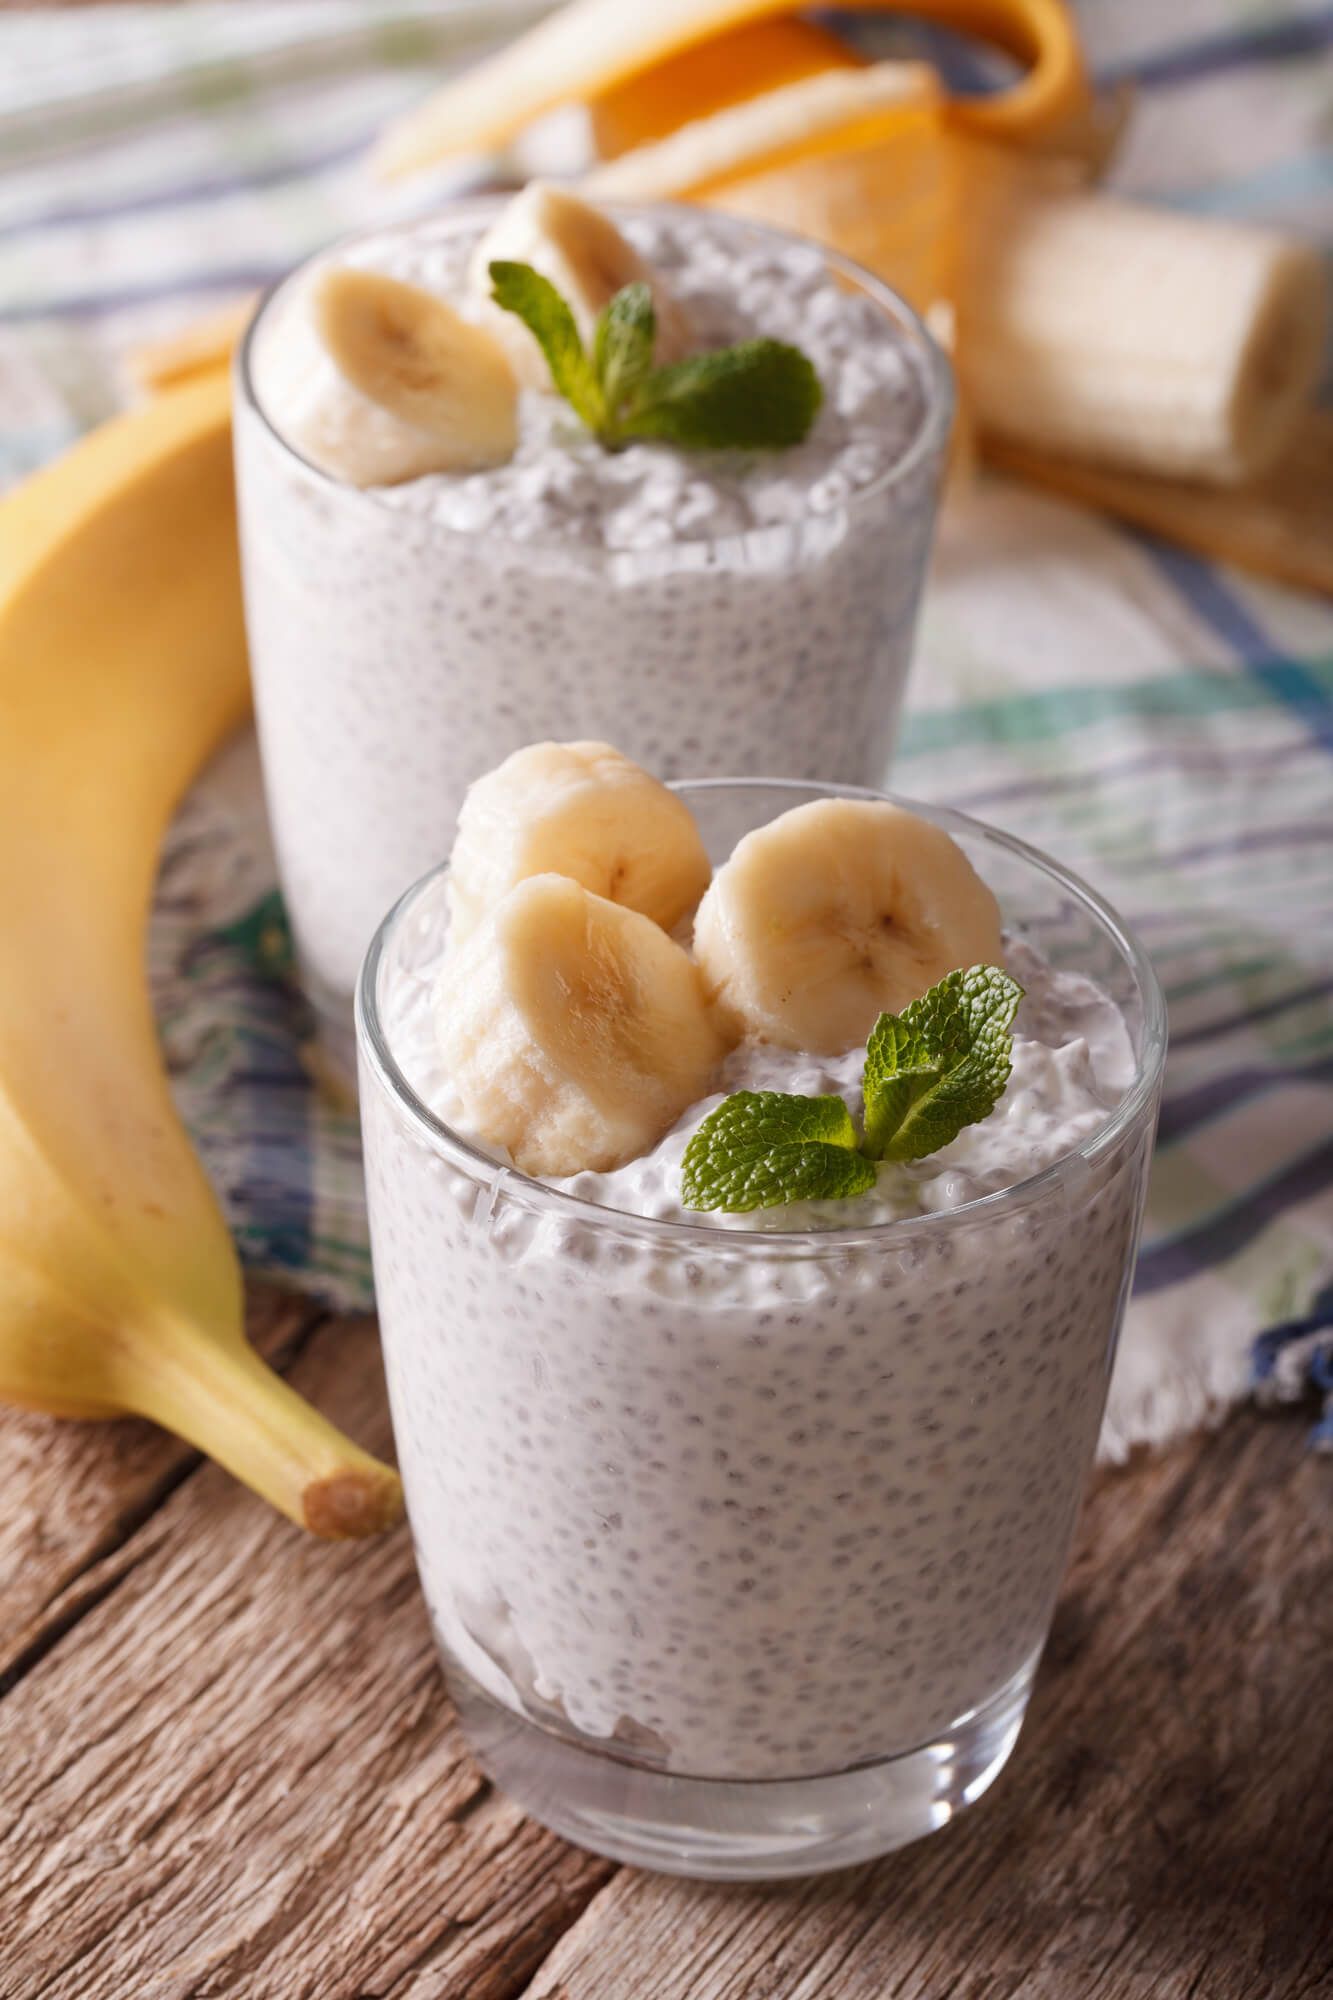 Coconut chia seed pudding in a glass with banana.